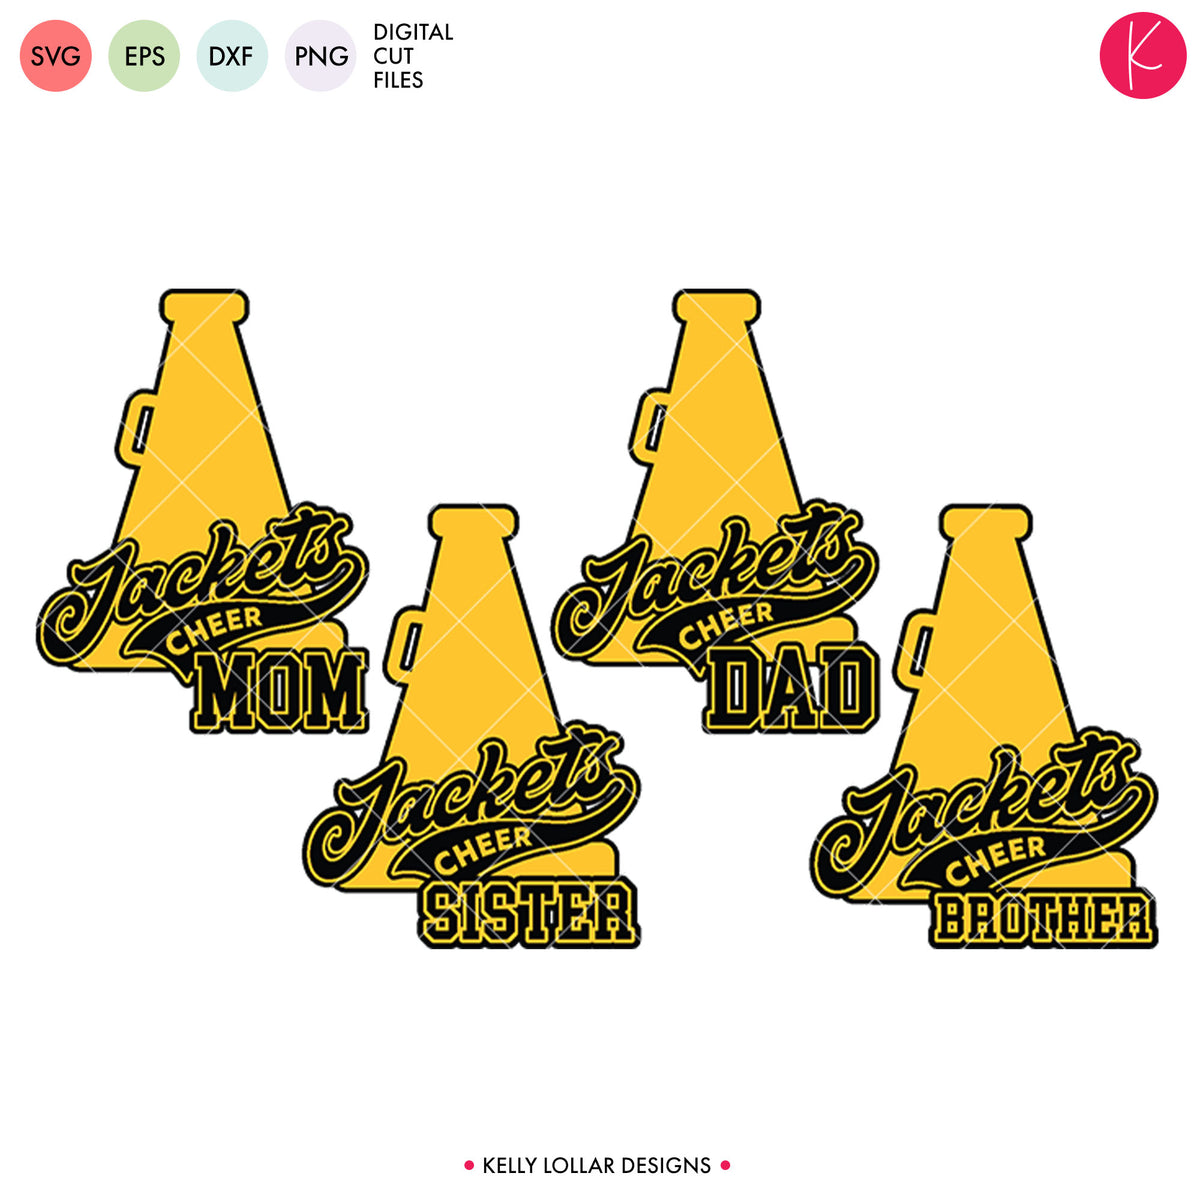 Jackets Cheer Bundle | SVG DXF EPS PNG Cut Files